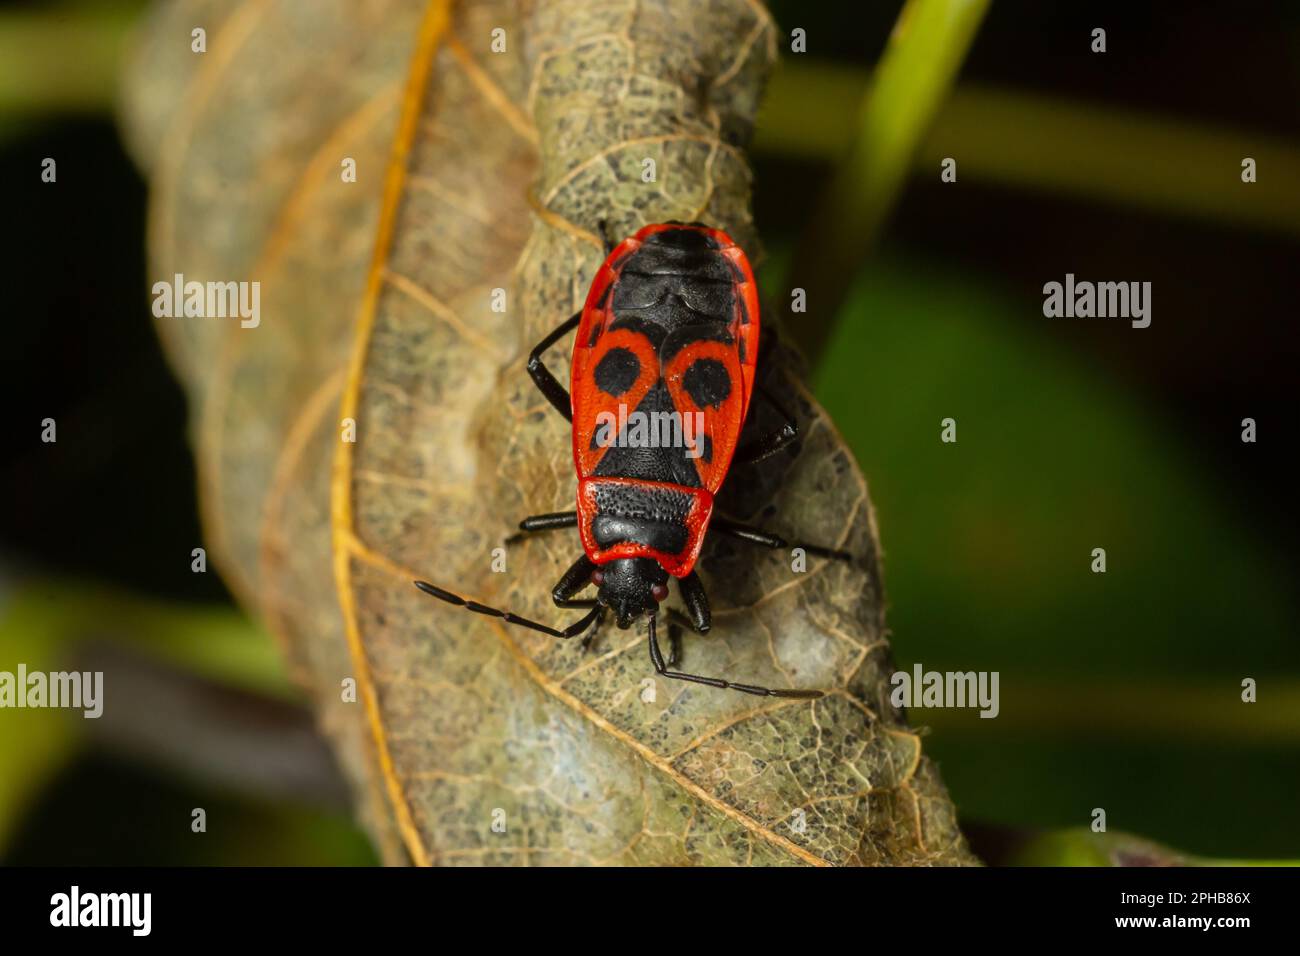 Natural closeup on the red firebug, Pyrrhocoris apterus sitting on a leaf in the garden. Stock Photo